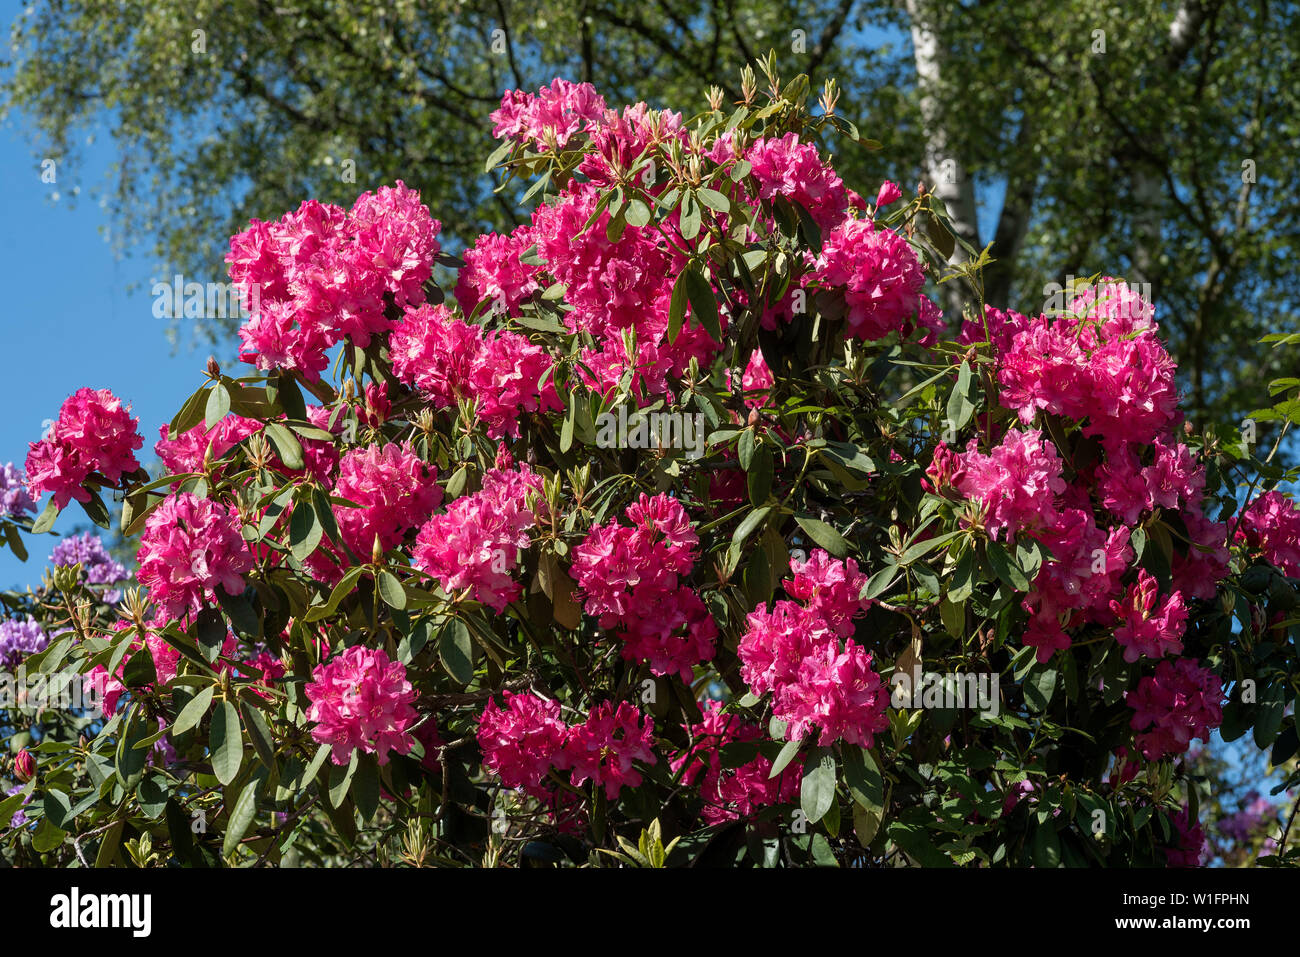 Brightly coloured pink rhododendron shrubs / trees. Stock Photo